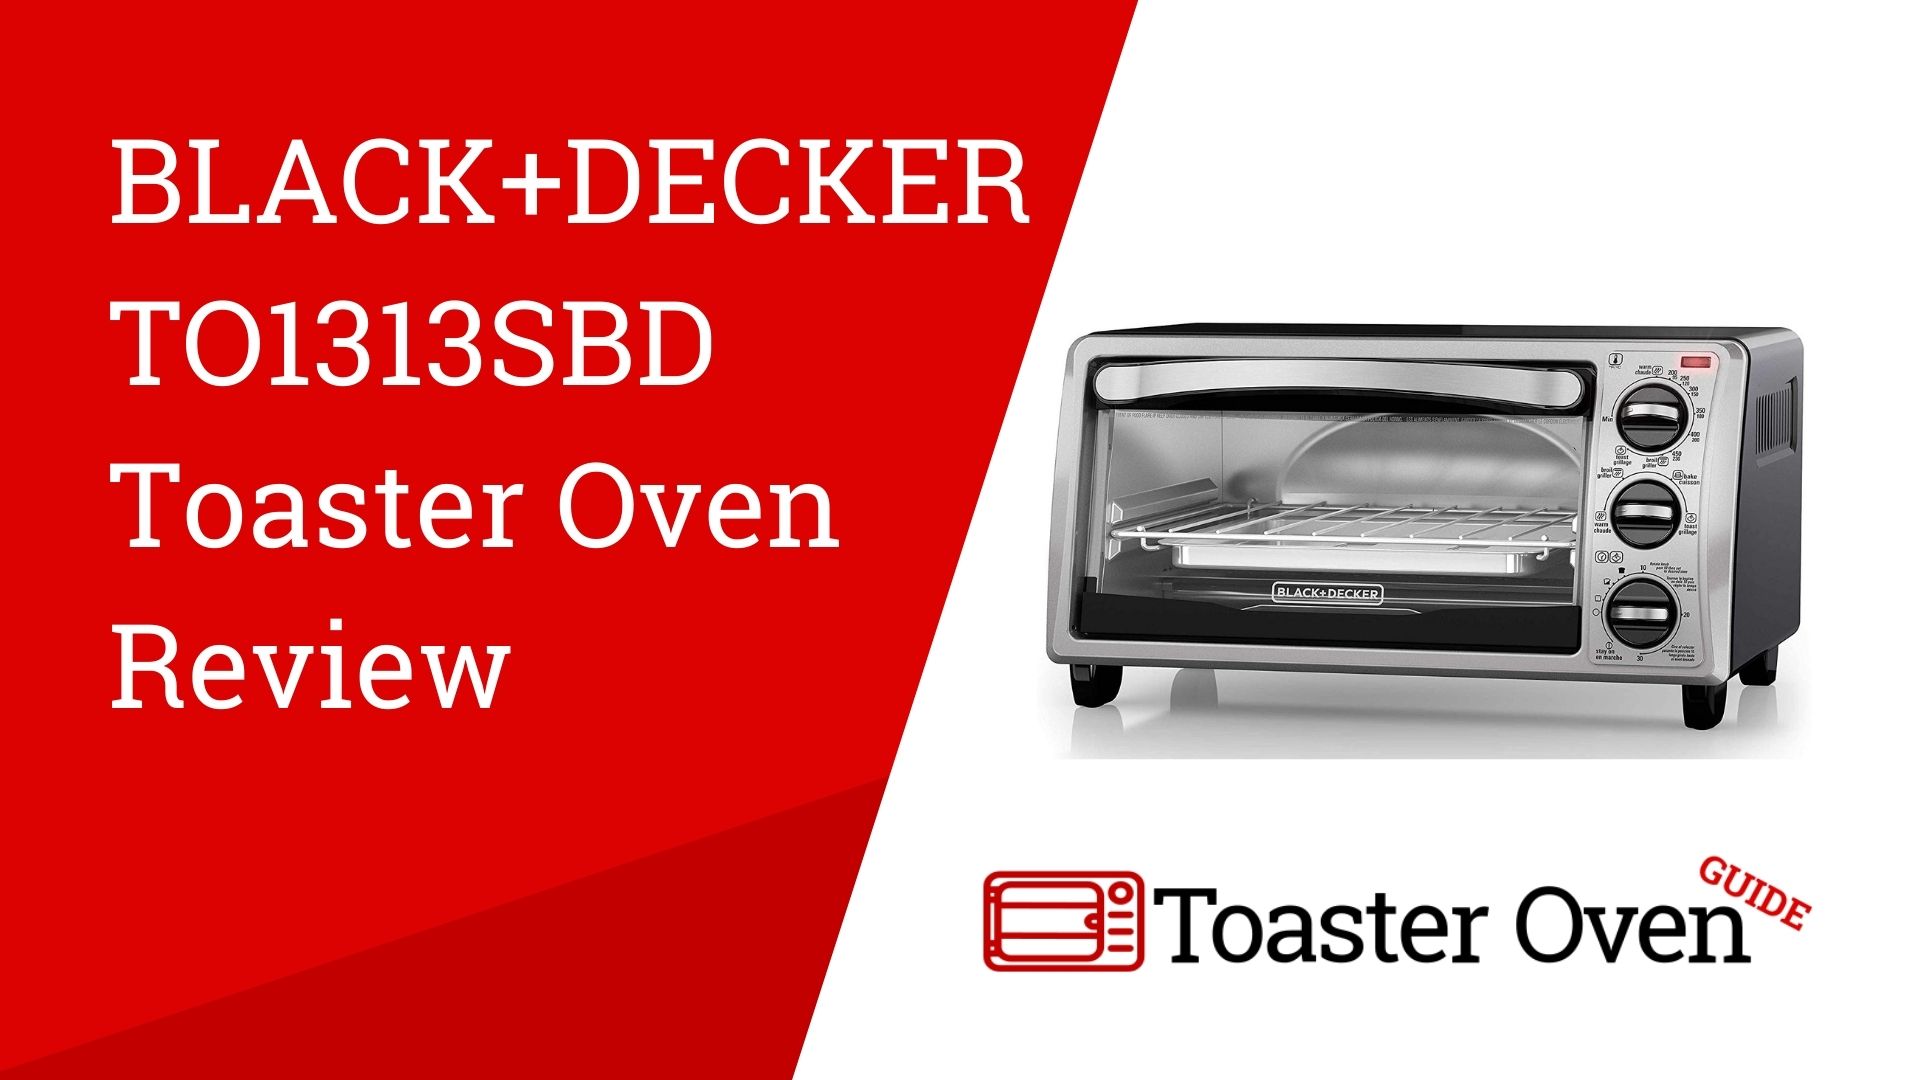 https://www.toasterovenguide.com/wp-content/uploads/2021/07/Black-and-Decker-TO1313SBD-Toaster-Oven-Review.jpg